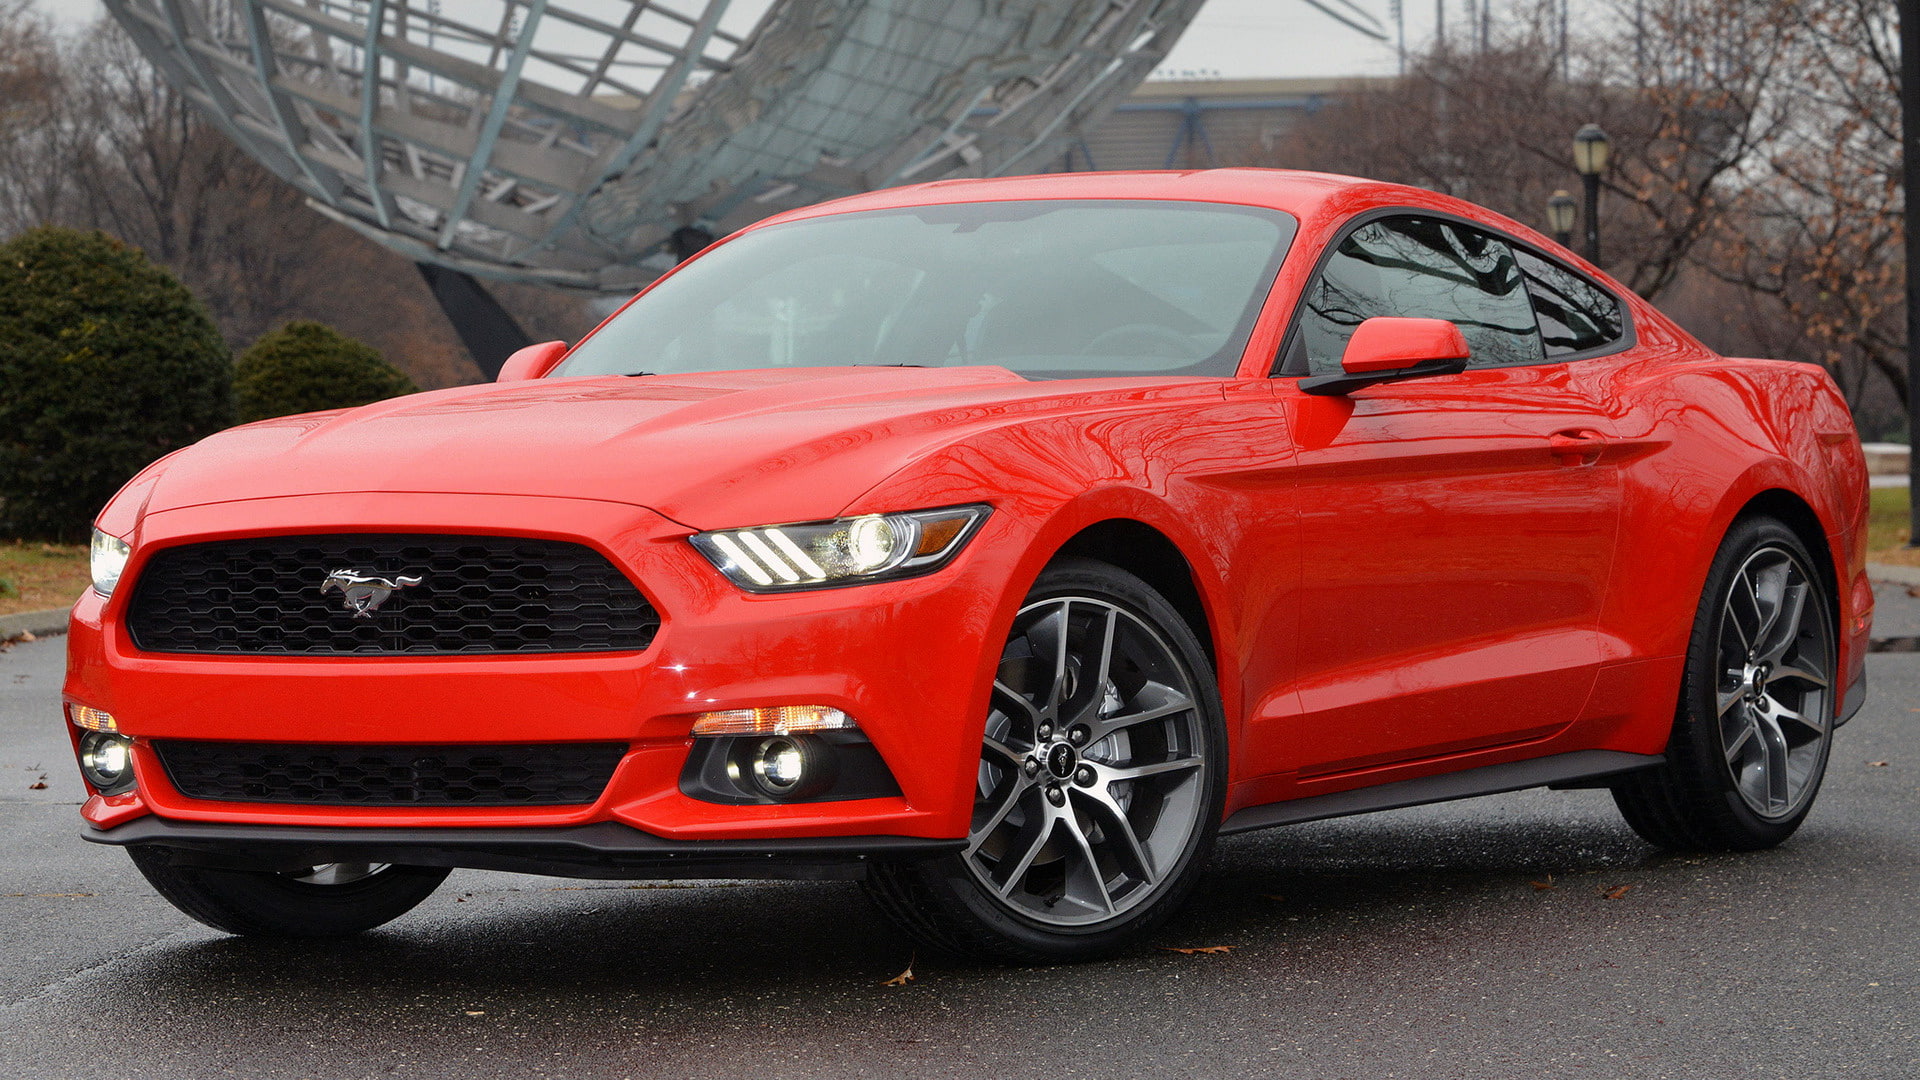 Ford, Ford Mustang, Car, Coupé, Muscle Car, Red Car